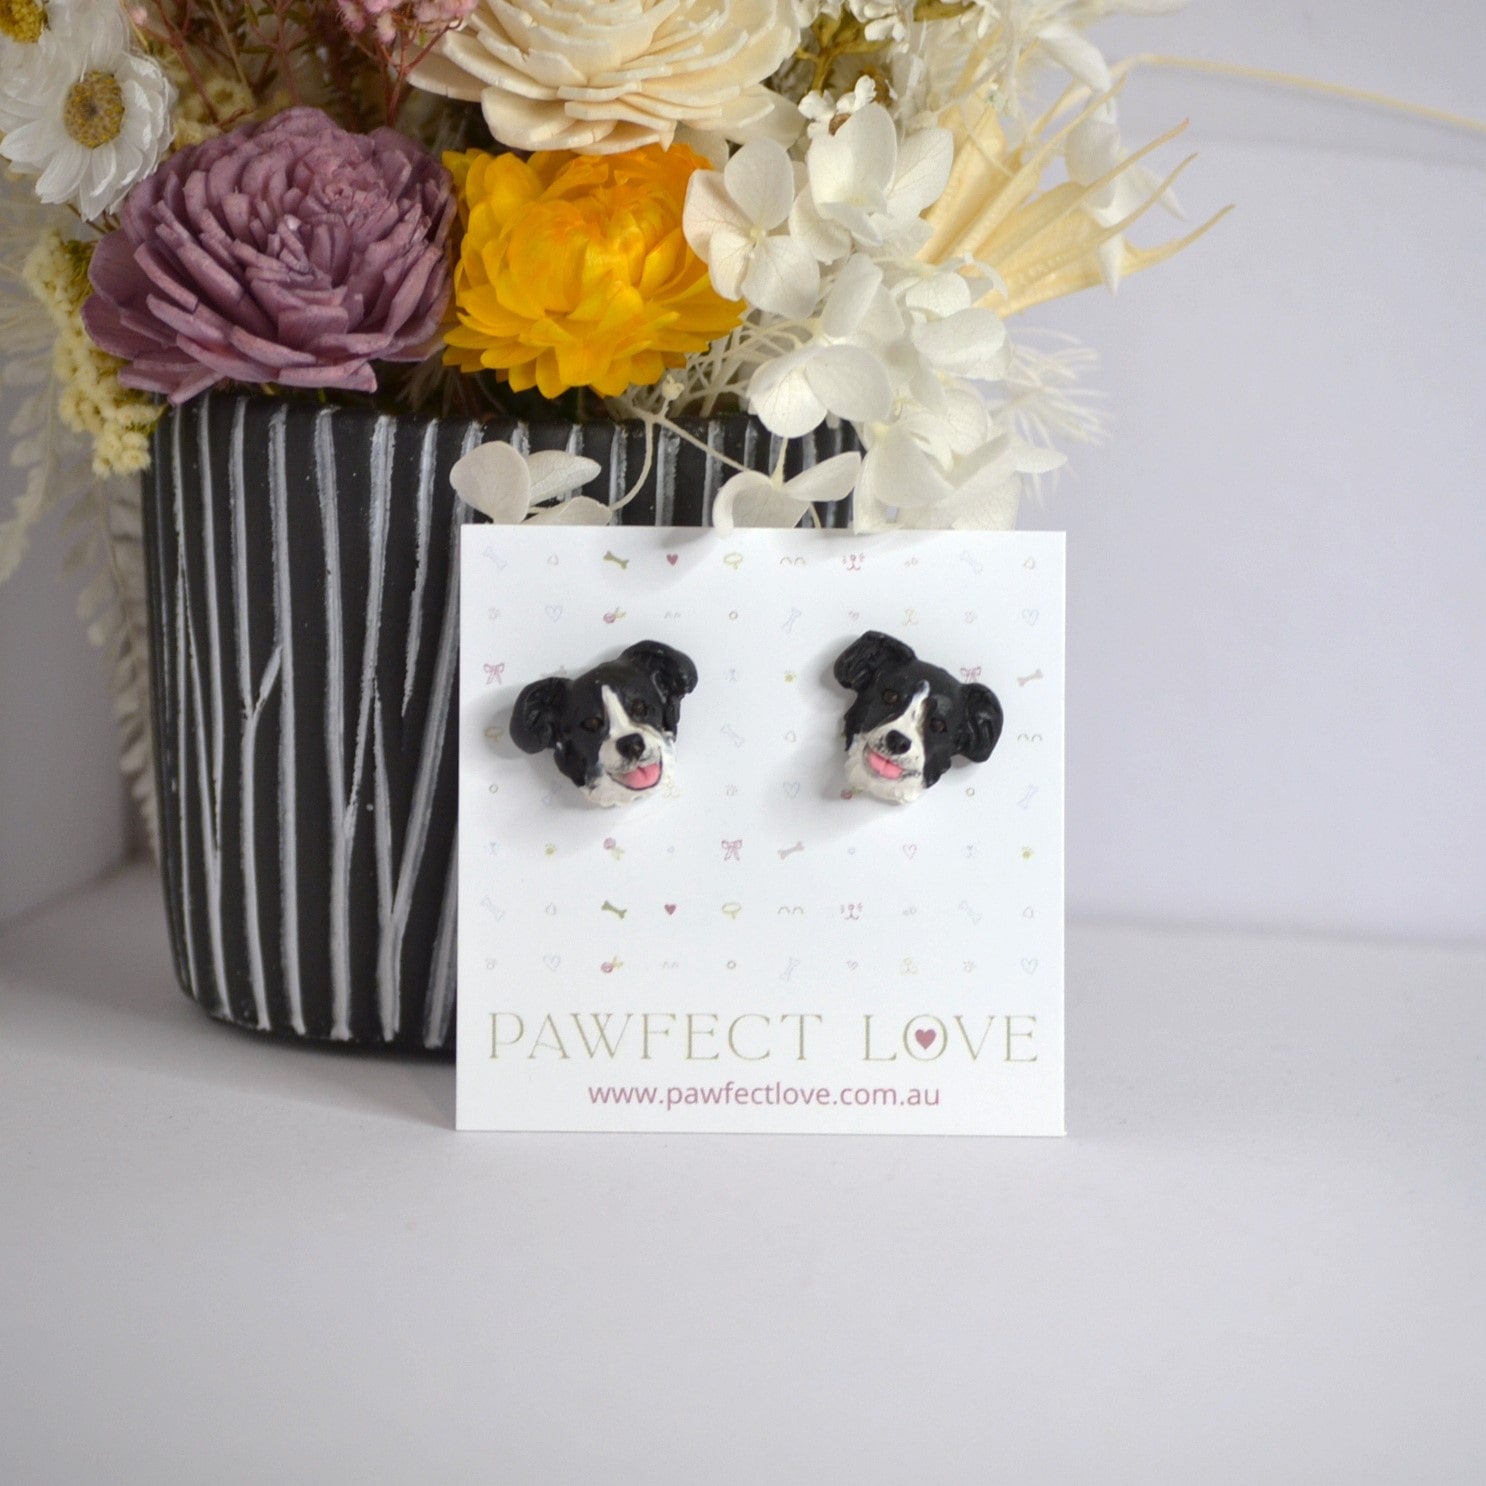 Handmade border collie stud earrings by Pawfect Love, positioned in front of dried flower arrangement